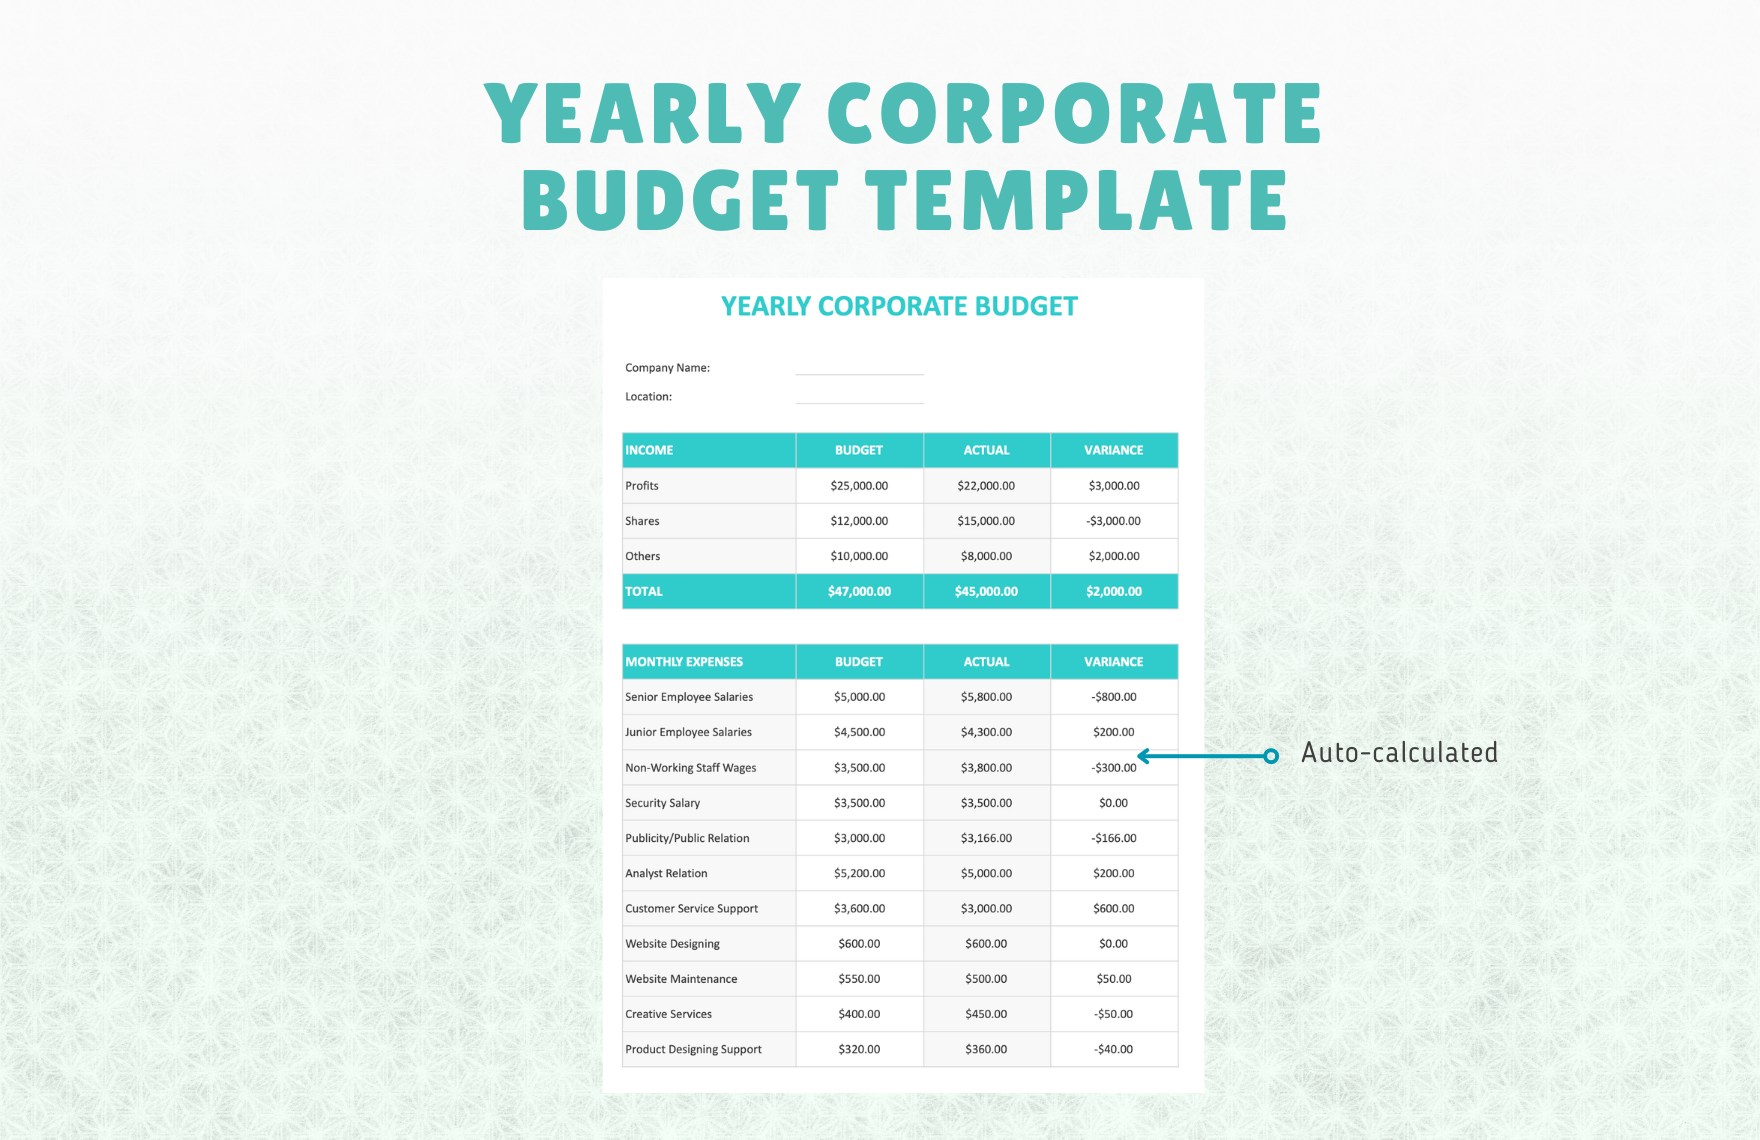 Yearly Corporate Budget Template